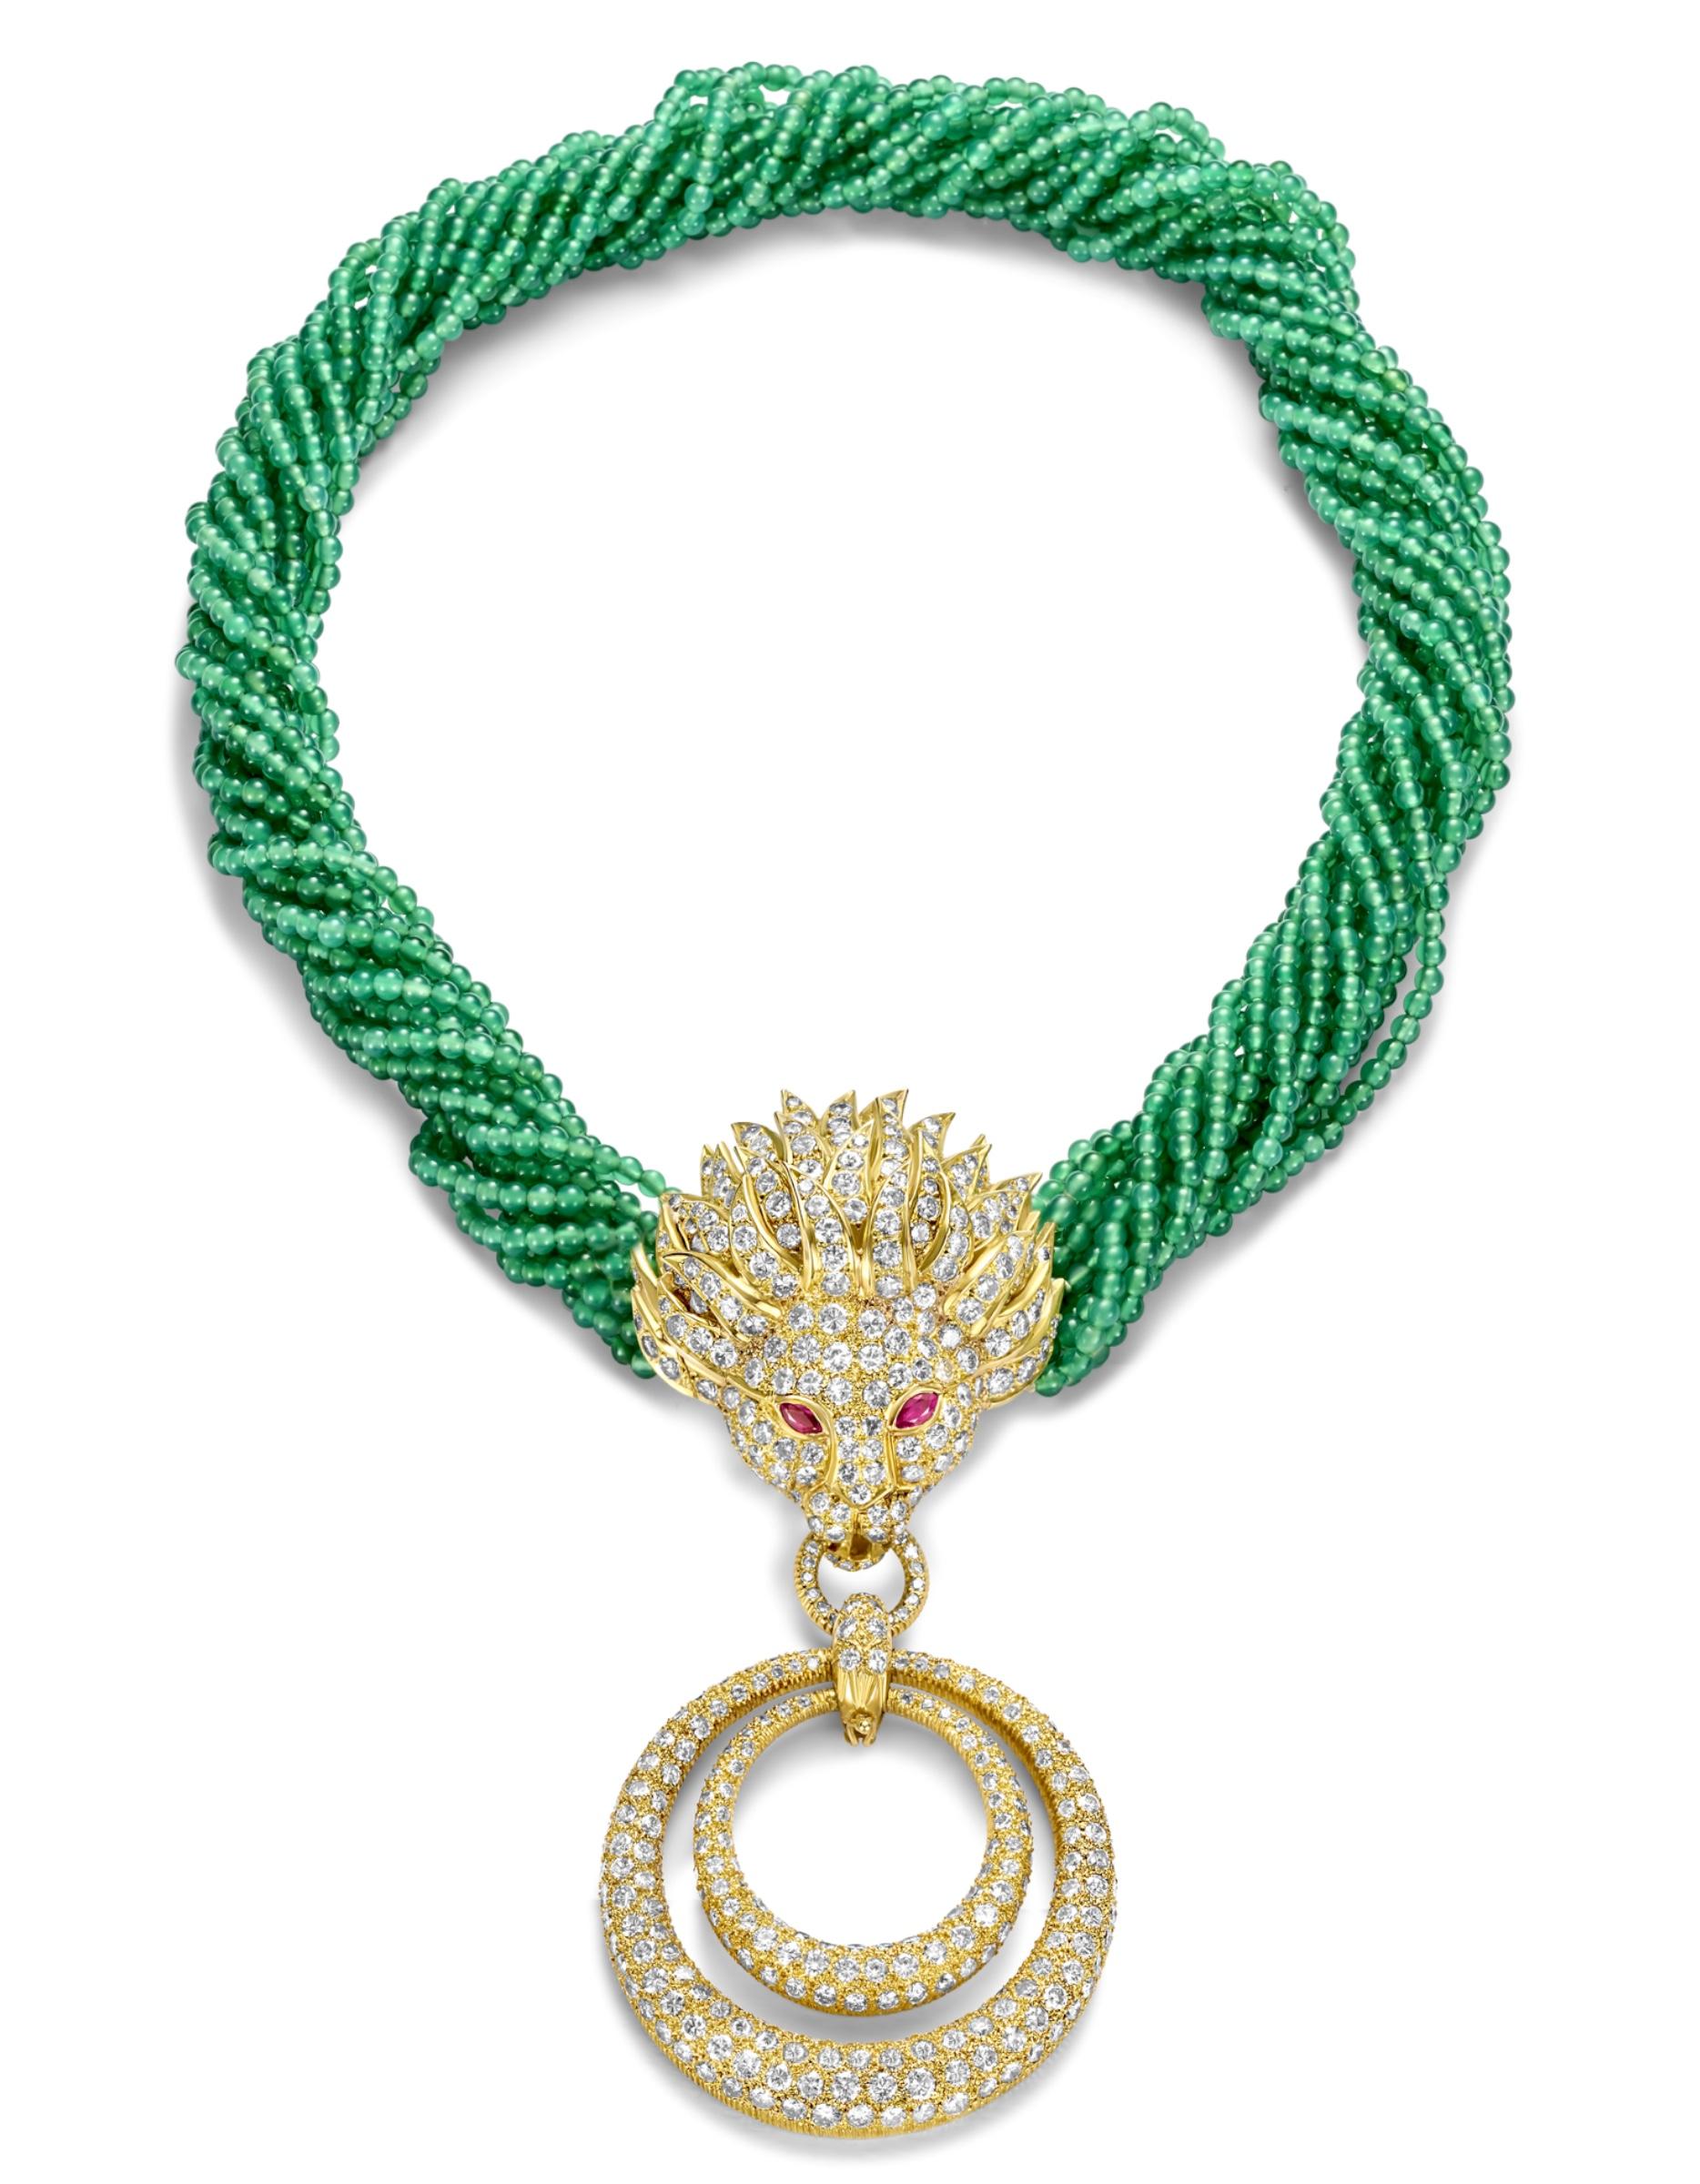 Amazing 18 kt. Yellow gold Adler Genève Necklace, Earrings, Bracelet, Ring Lion Set from Estate Sultan Of Oman Qaboos Bin Said

Necklace 
Diamonds: brilliant cut diamonds, together approx. 18.24 ct.
Emeralds:
Rubies: 2 marquise cut rubies
Material: